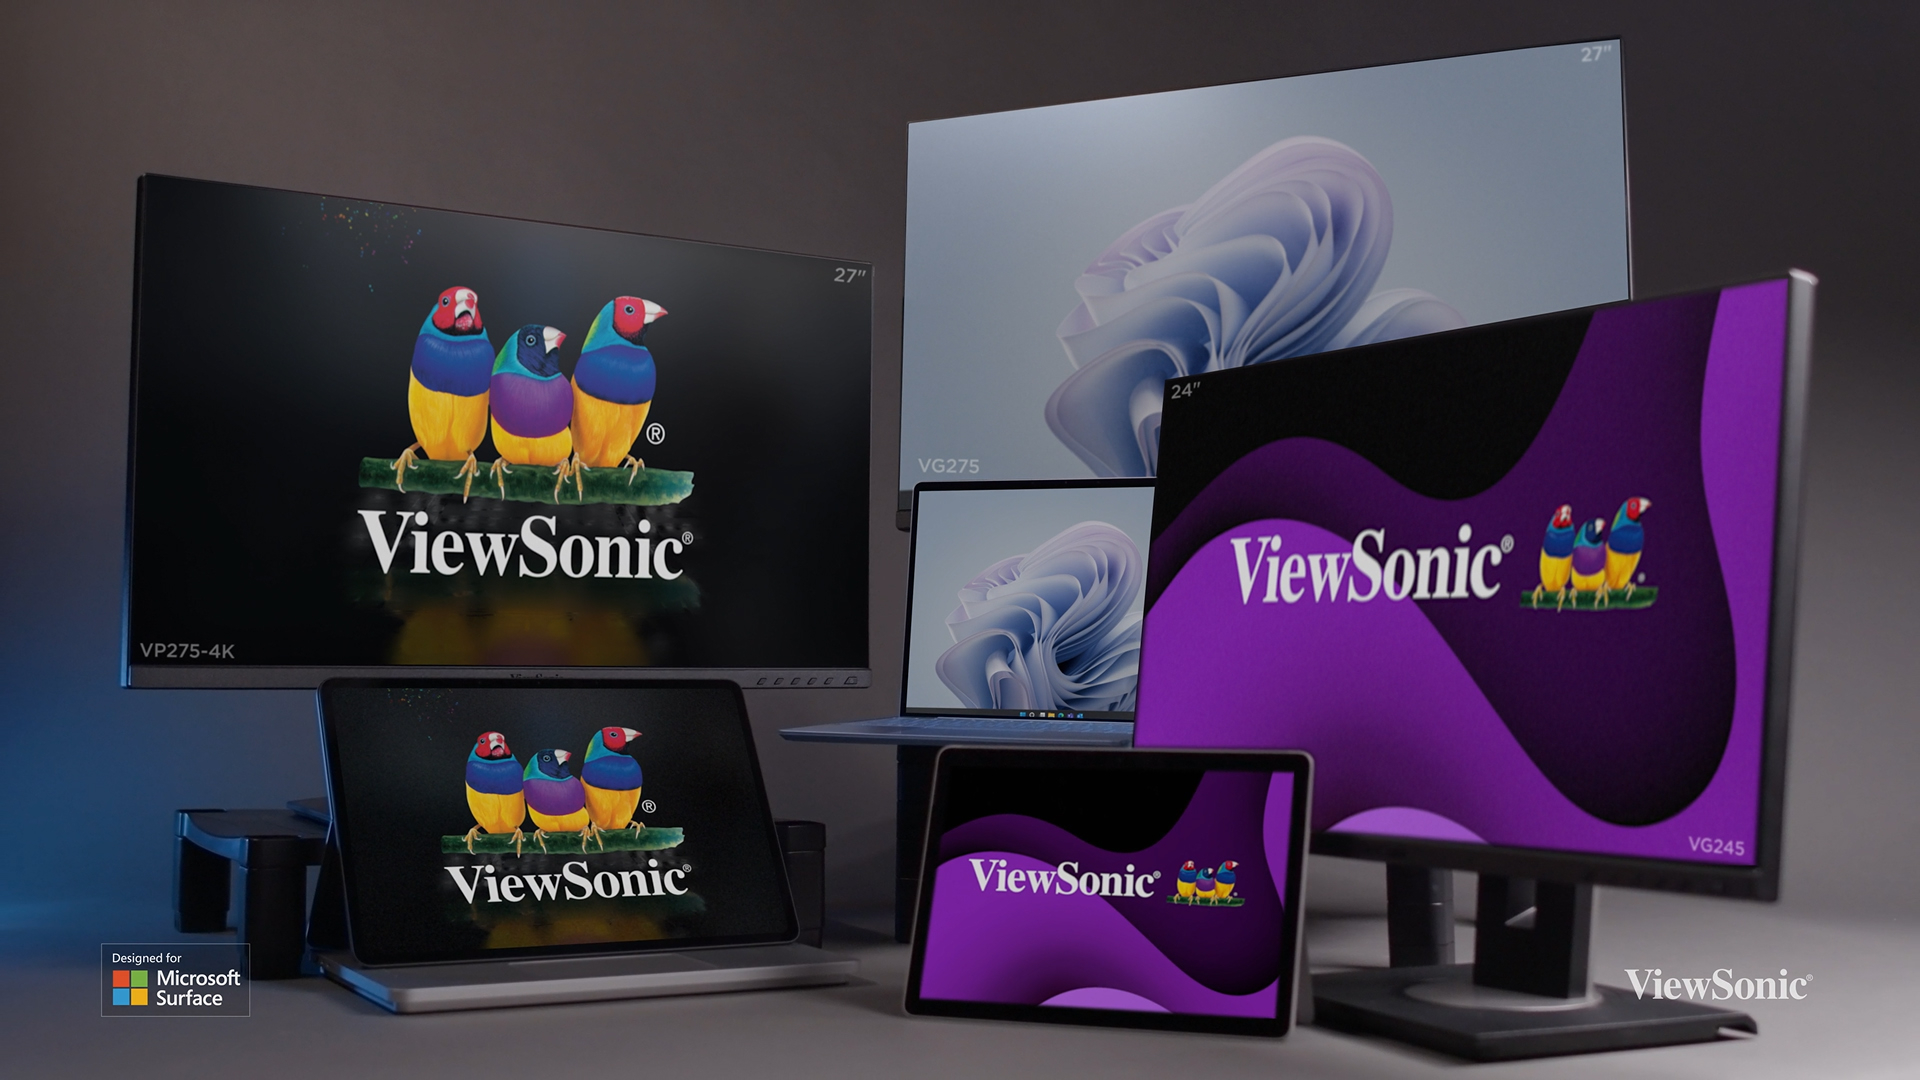 The ViewSonic Designed for Surface Certified VG245, VG275, and VP275-4K monitors; Created to take the workspace to the next level.